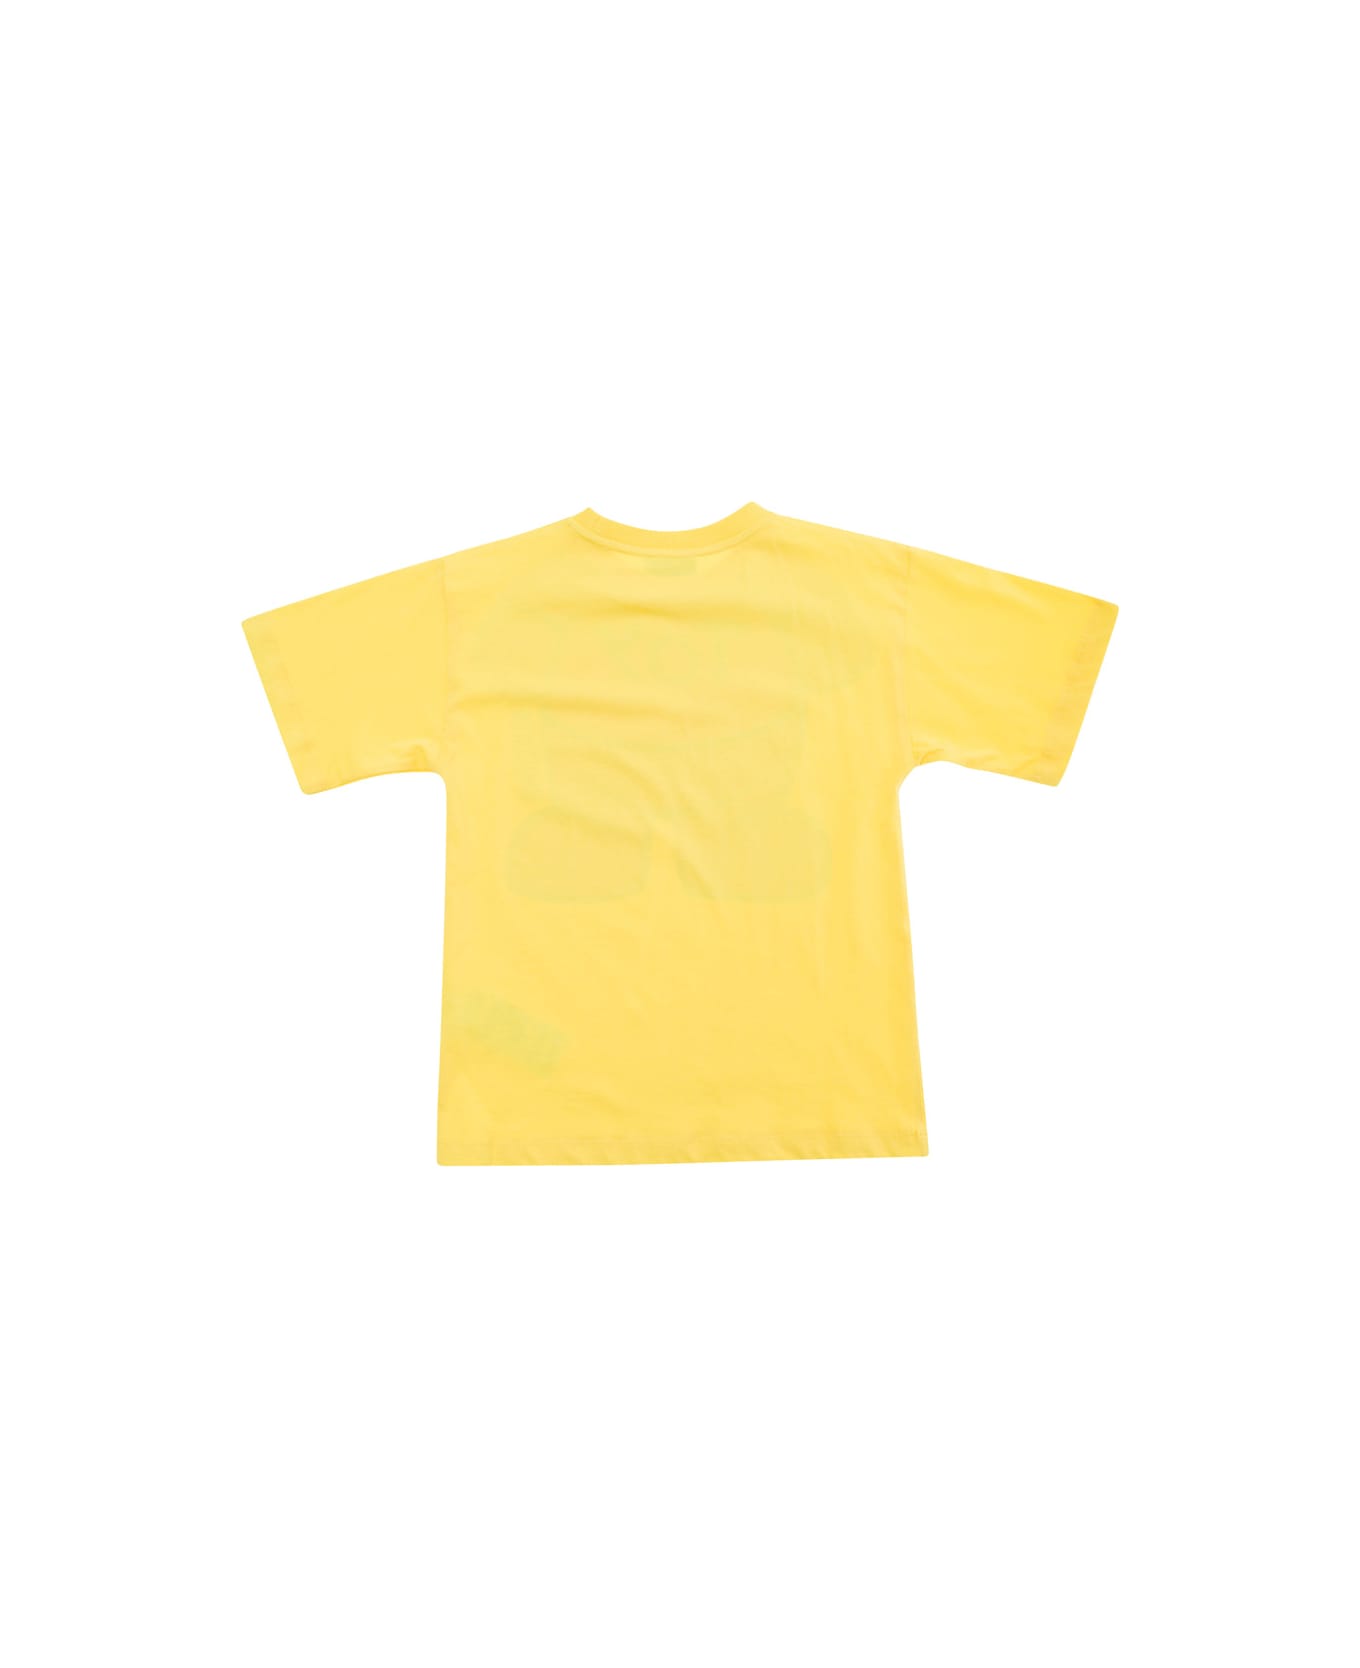 Moschino Yellow T-shirt With Teddy Bear Print In Cotton Boy - Yellow